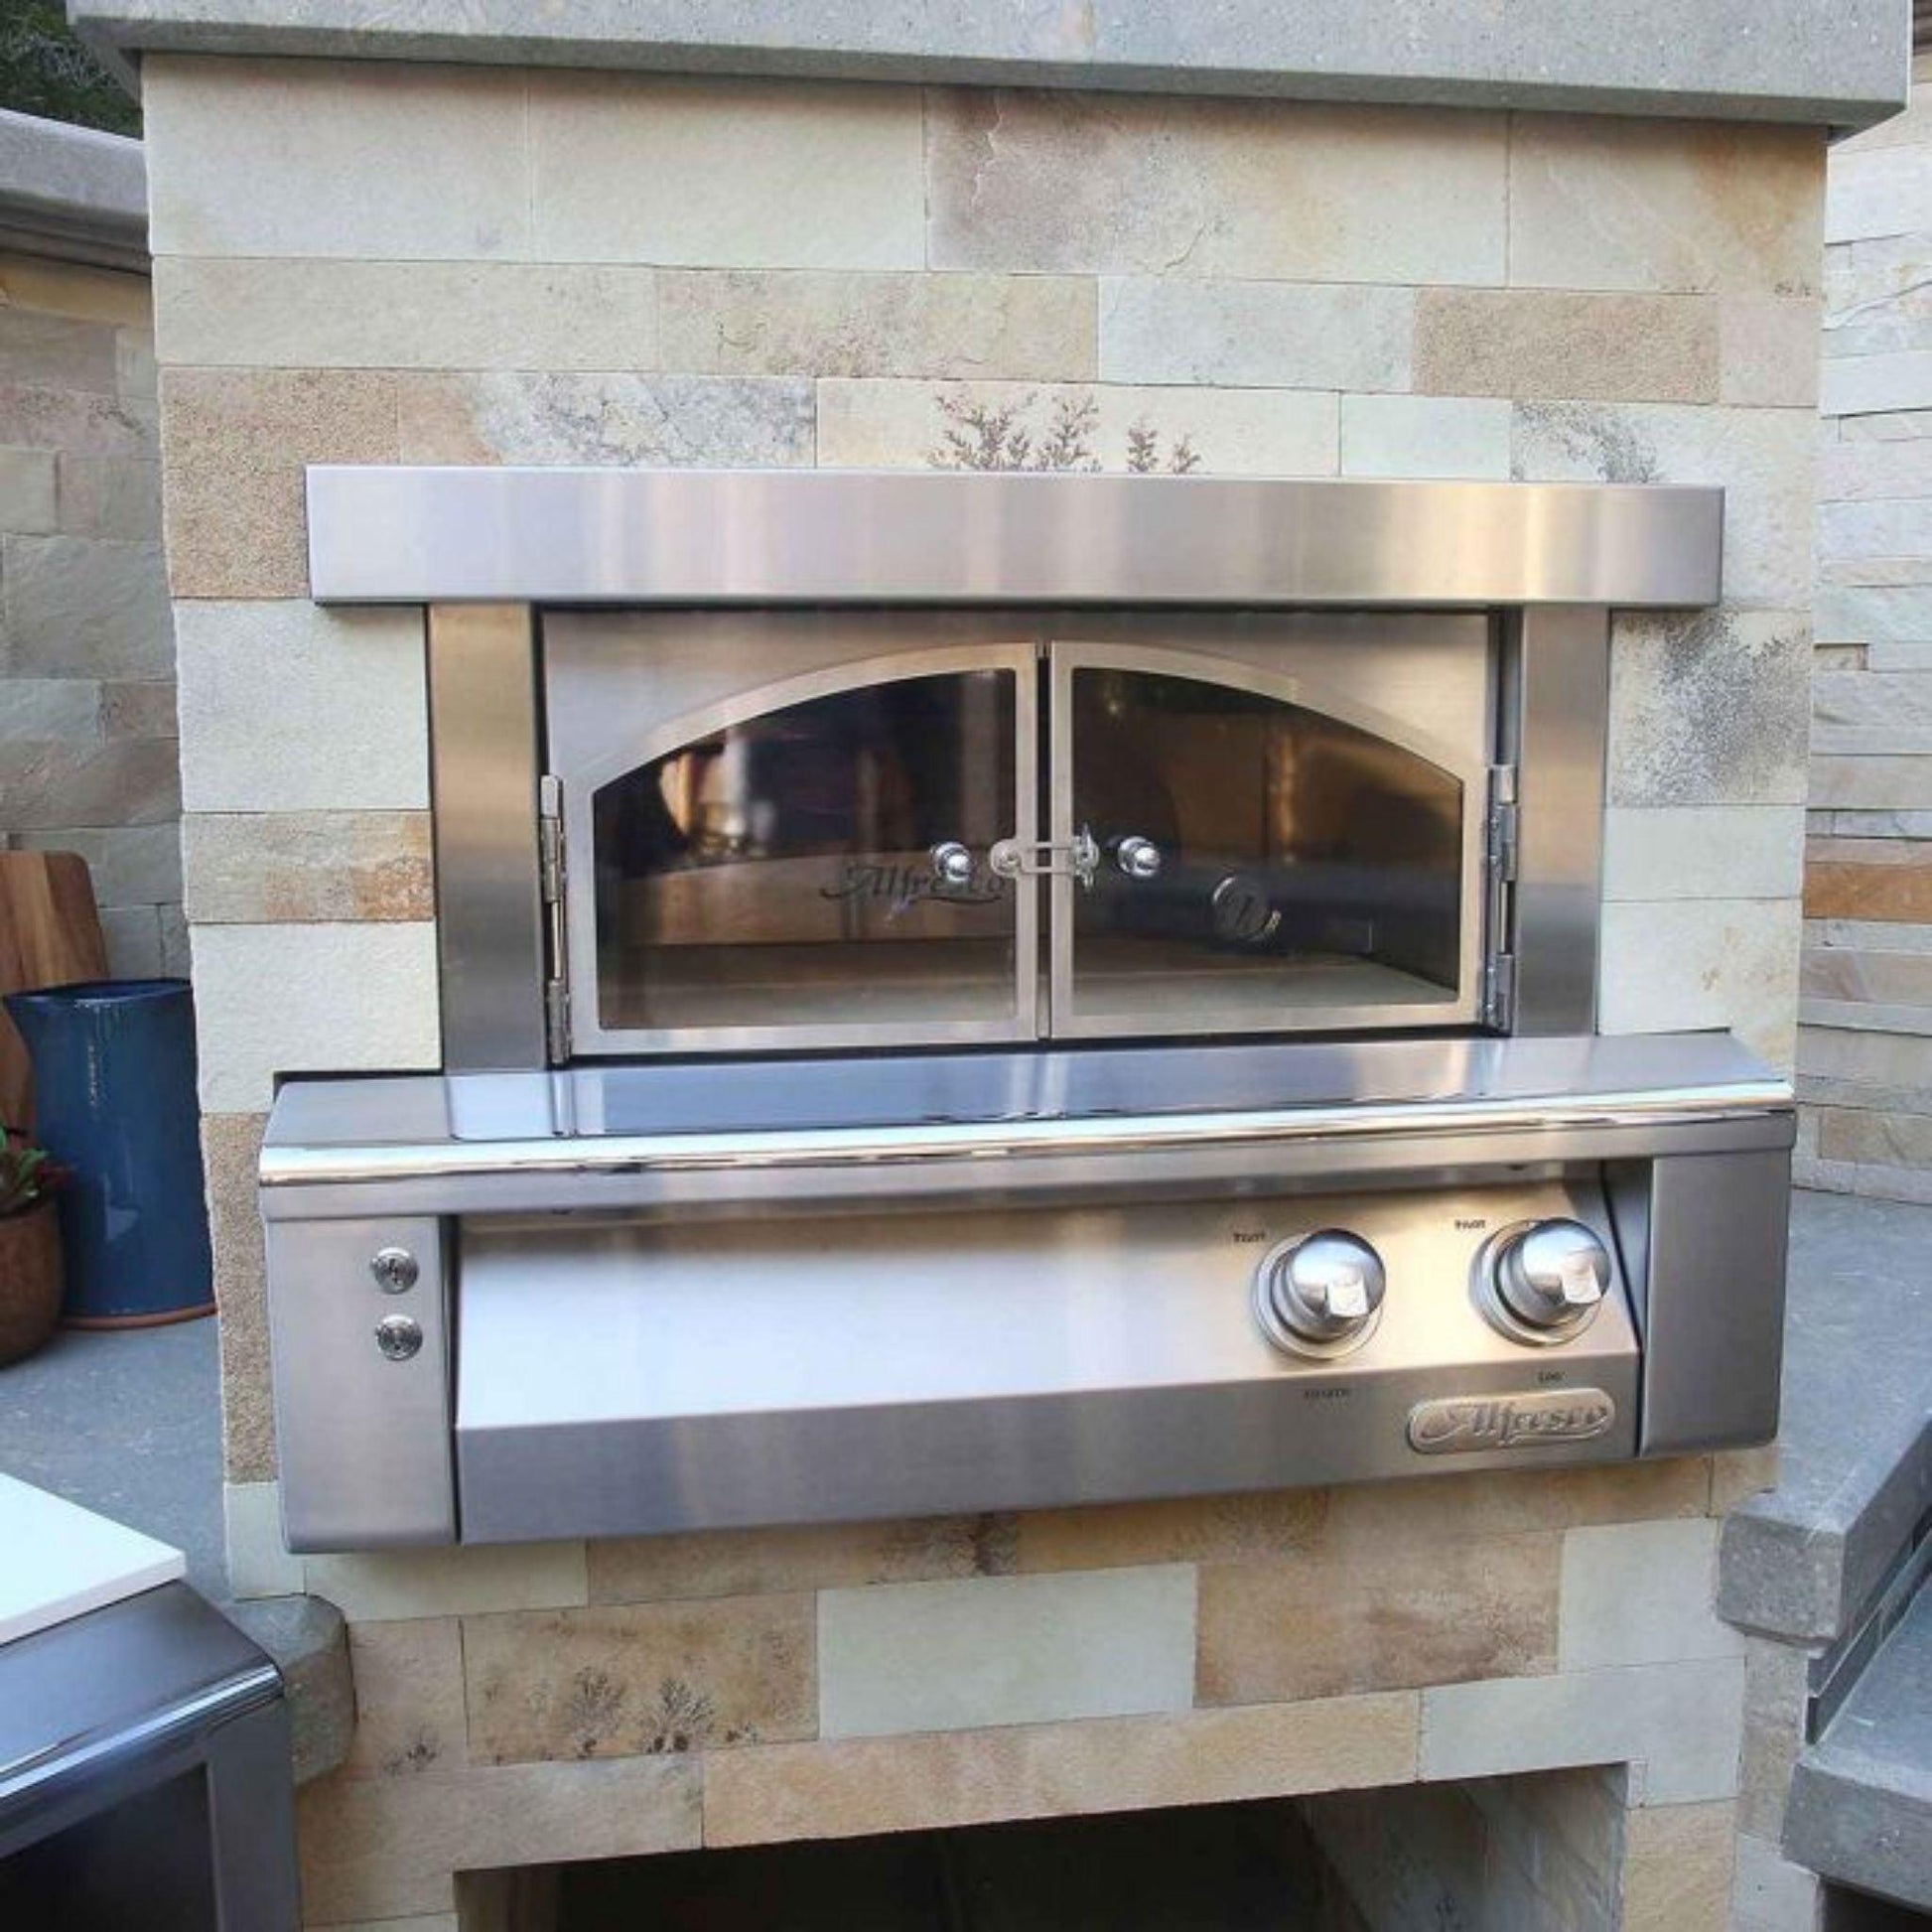 Alfresco 30" Raspberry Red Gloss Natural Gas Pizza Oven for Built-in Installations